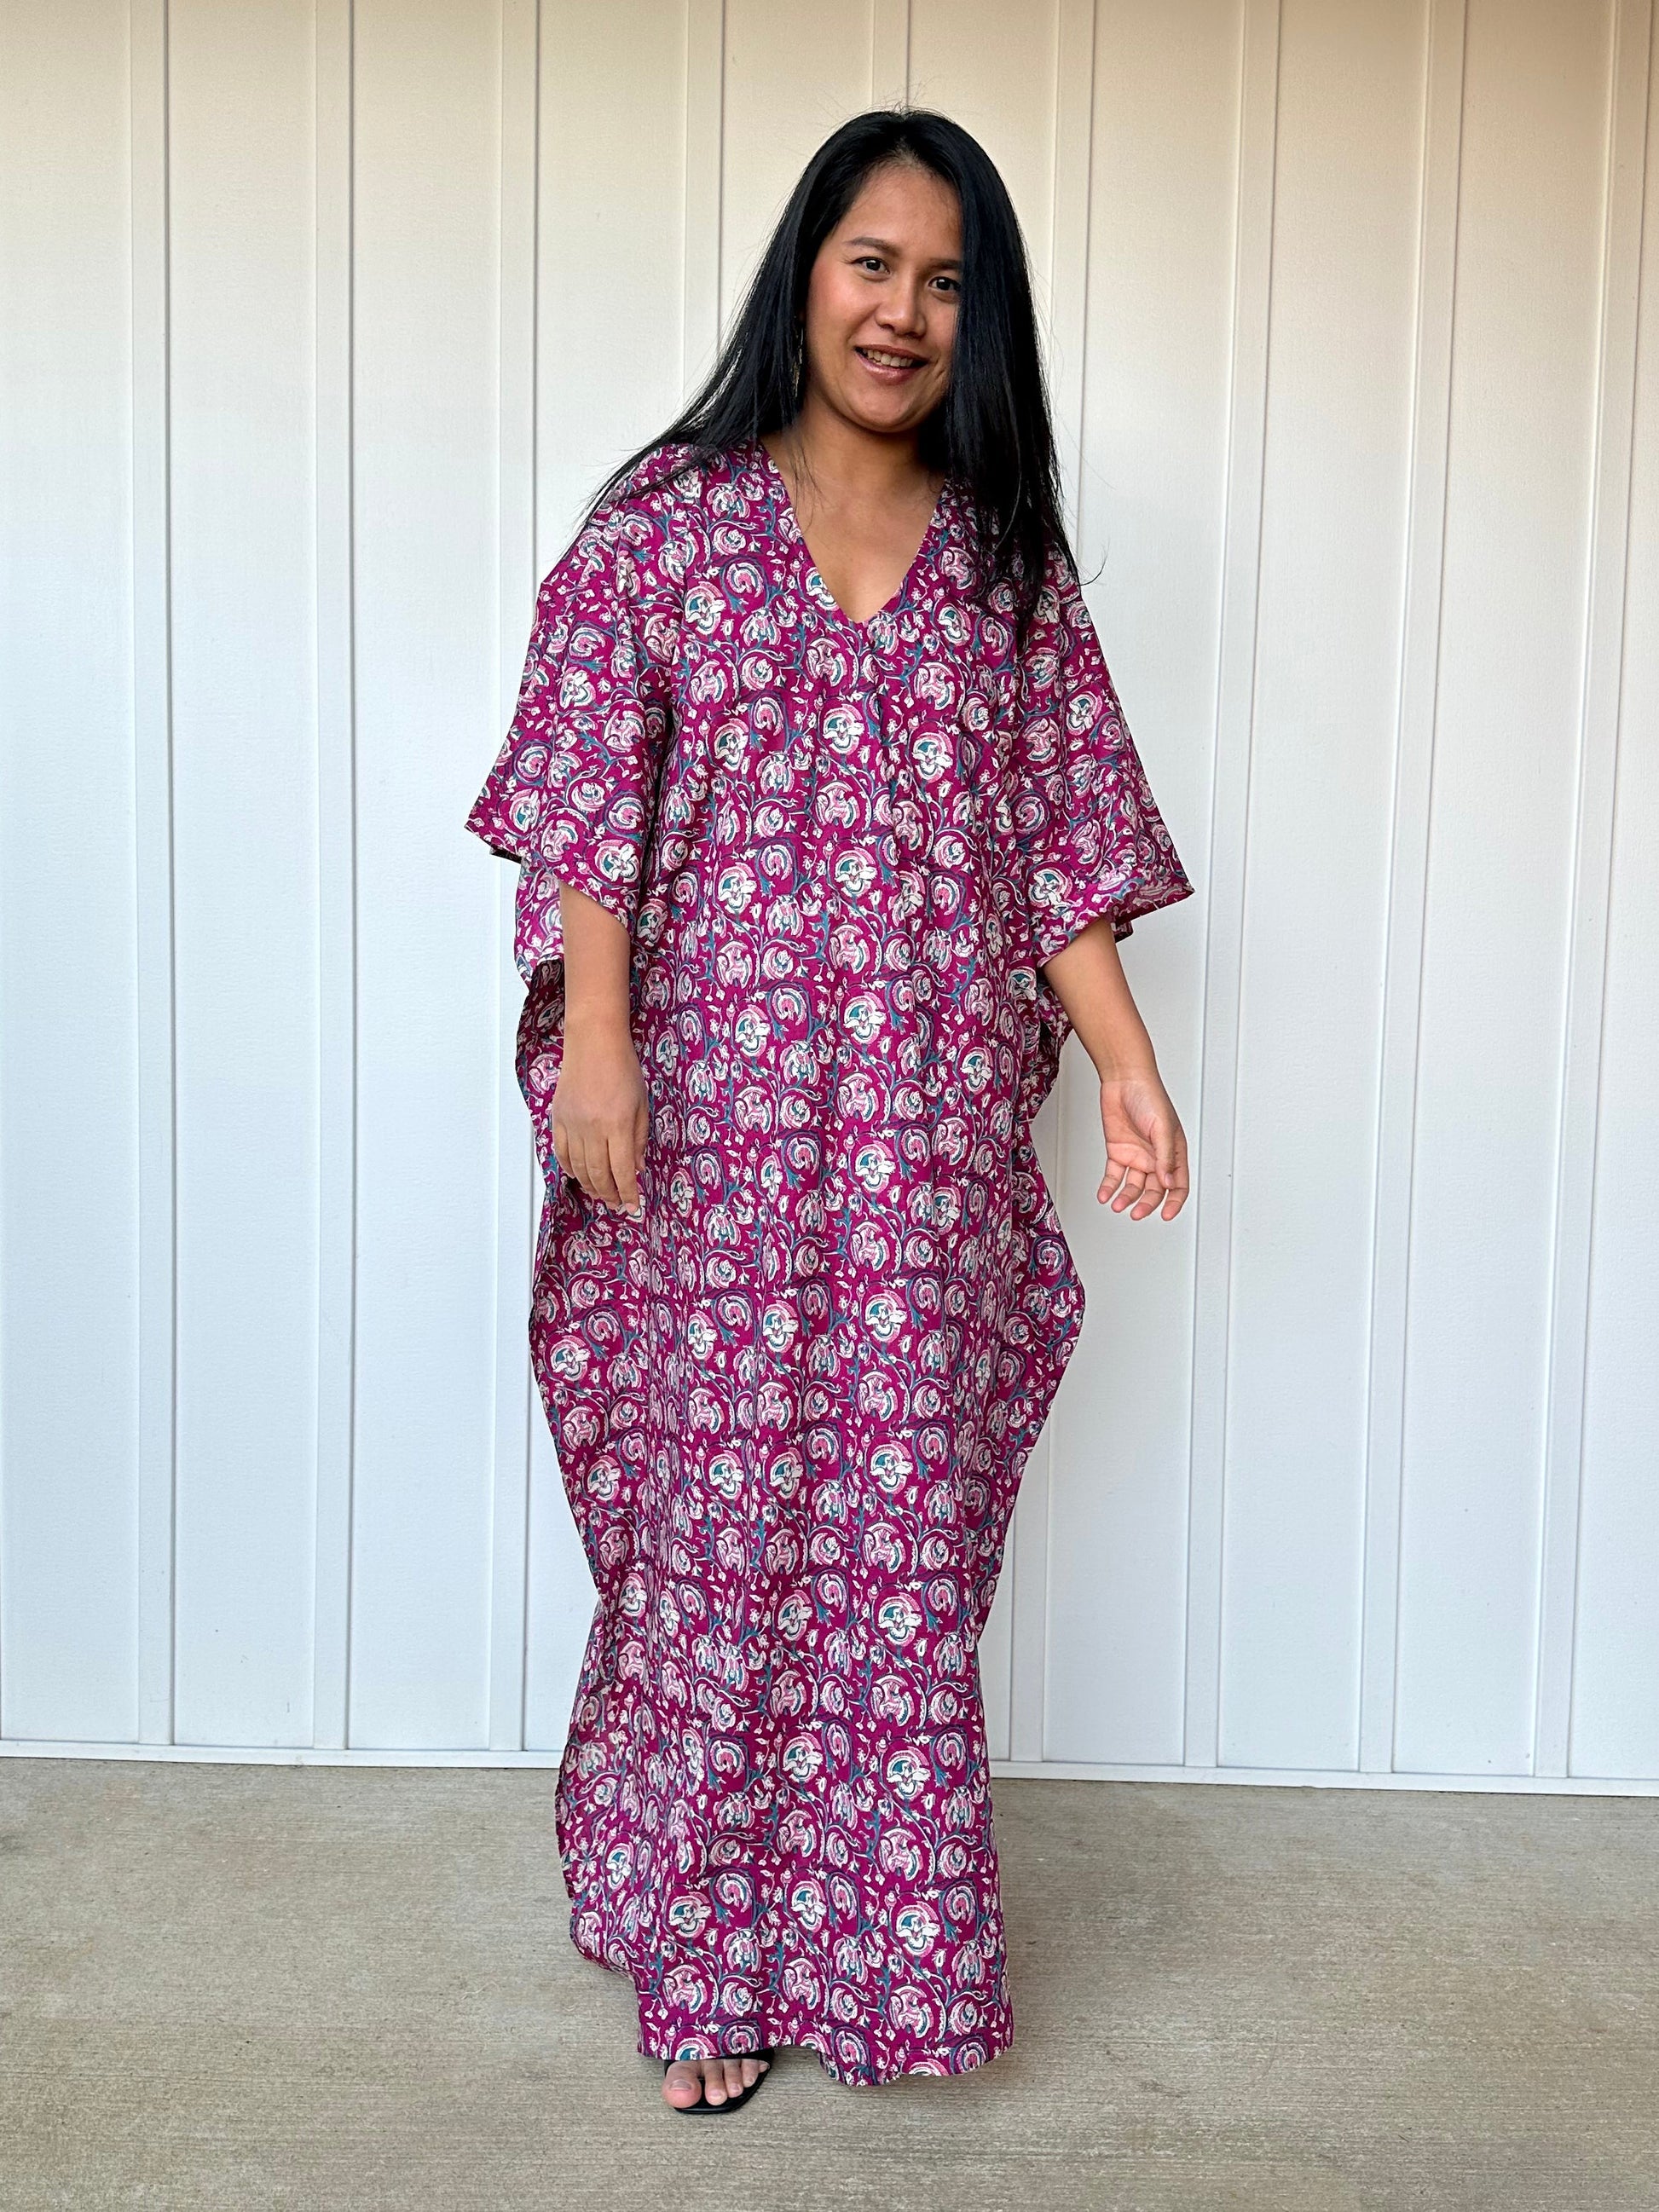 MALA handworks 56 Evelyn Kaftan in Red and Floral Pattern